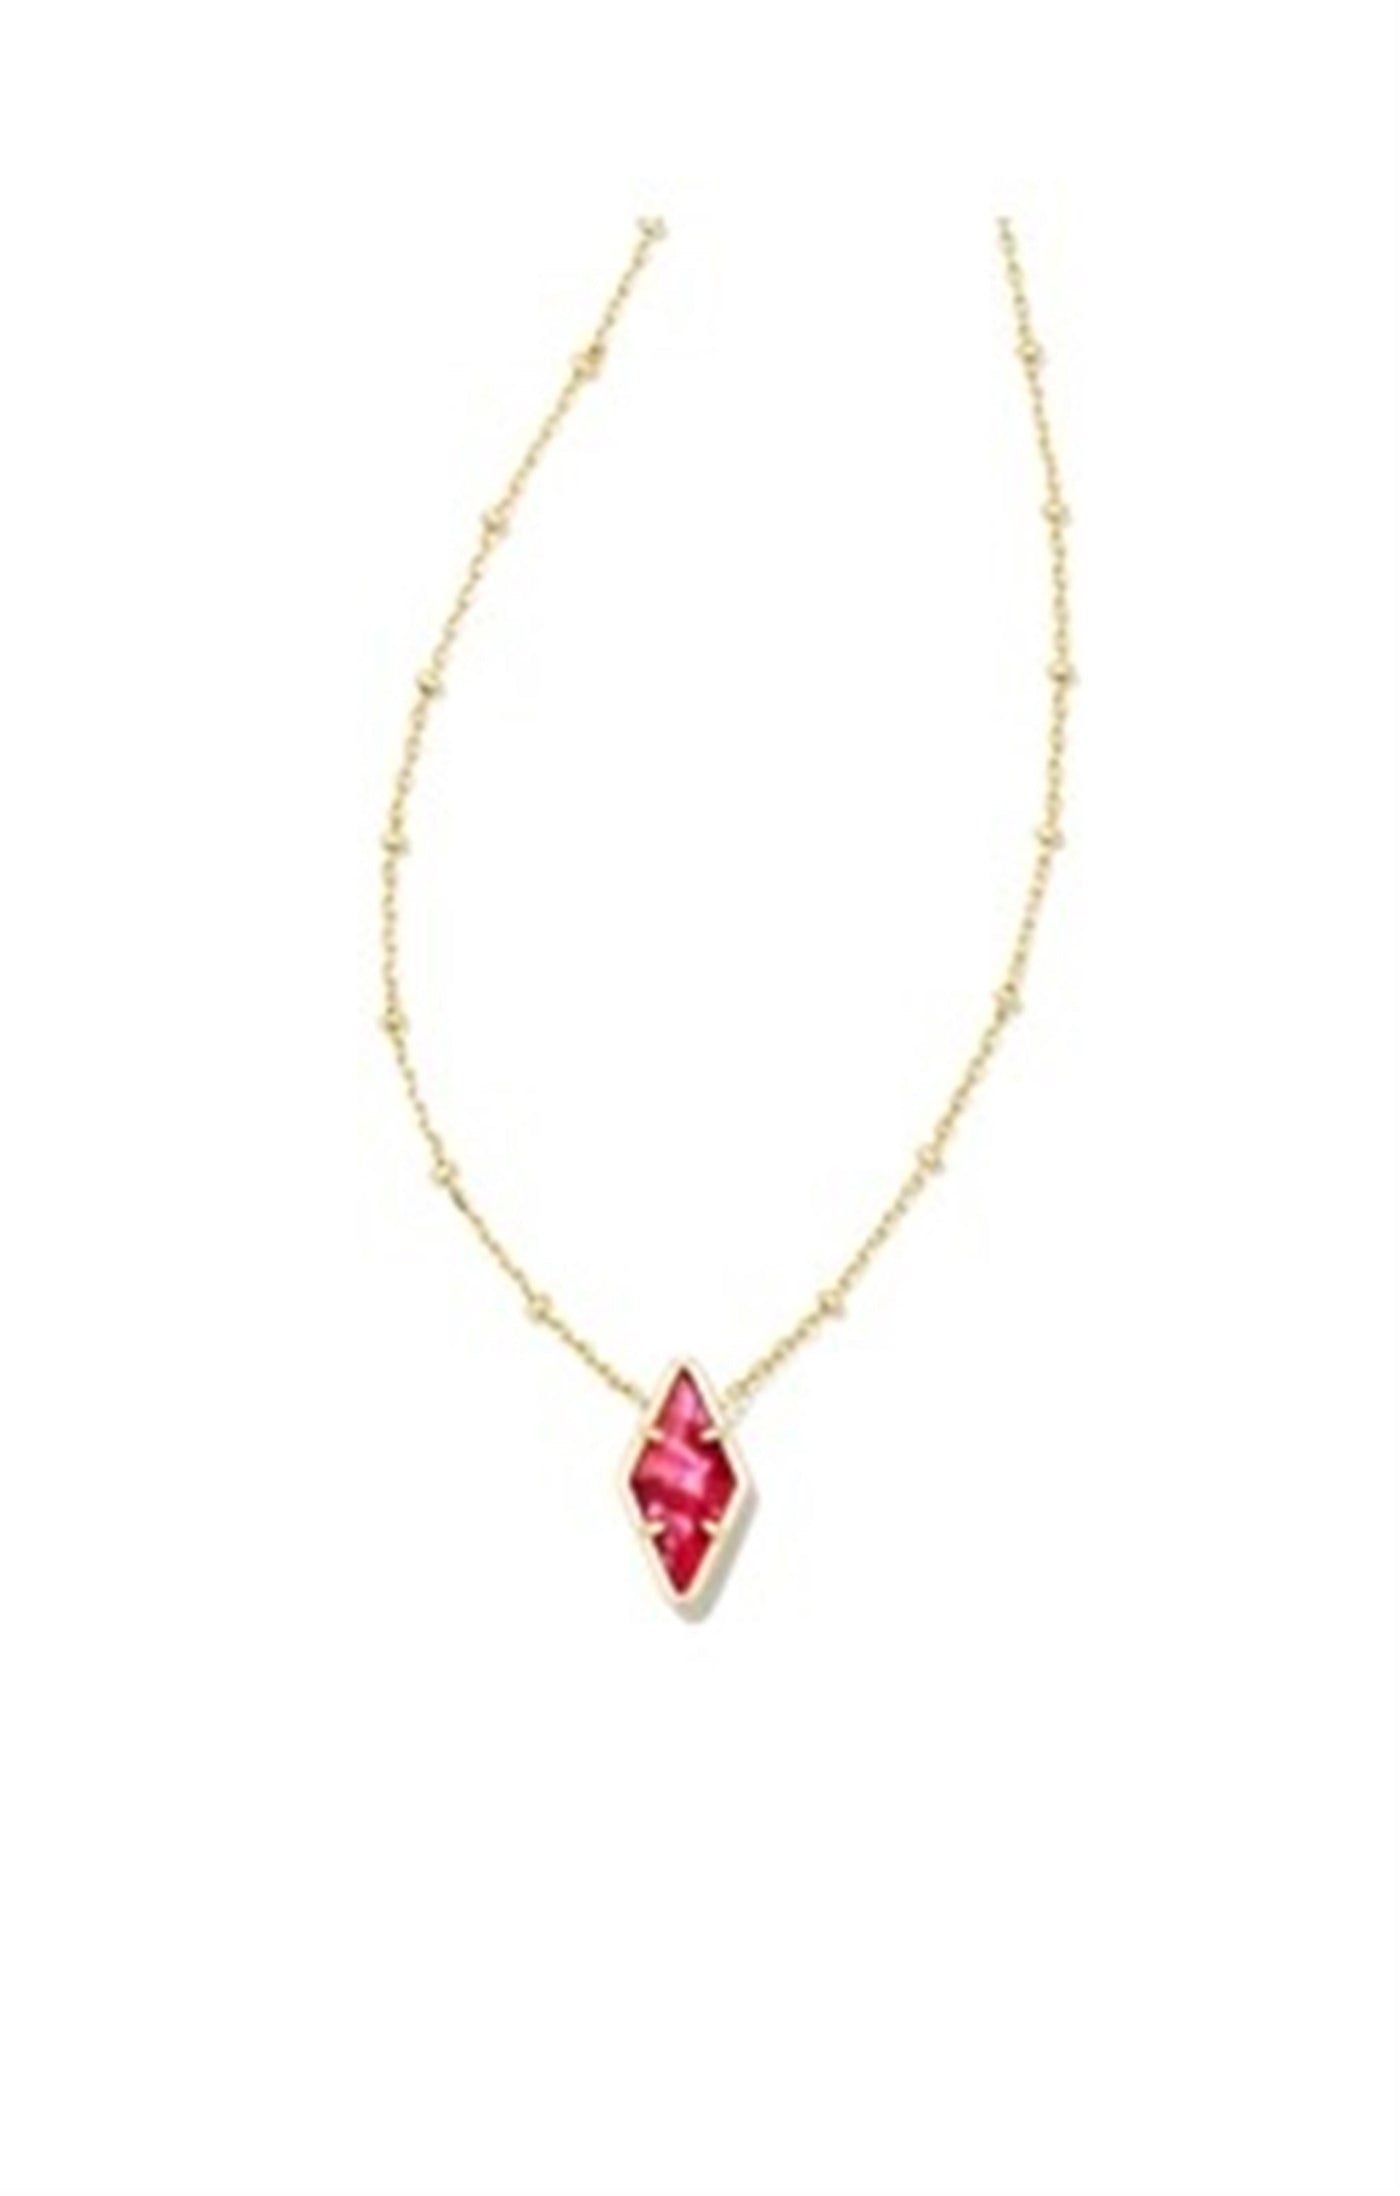 Gold Tone Necklace Featuring Raspberry Illusion by Kendra Scott